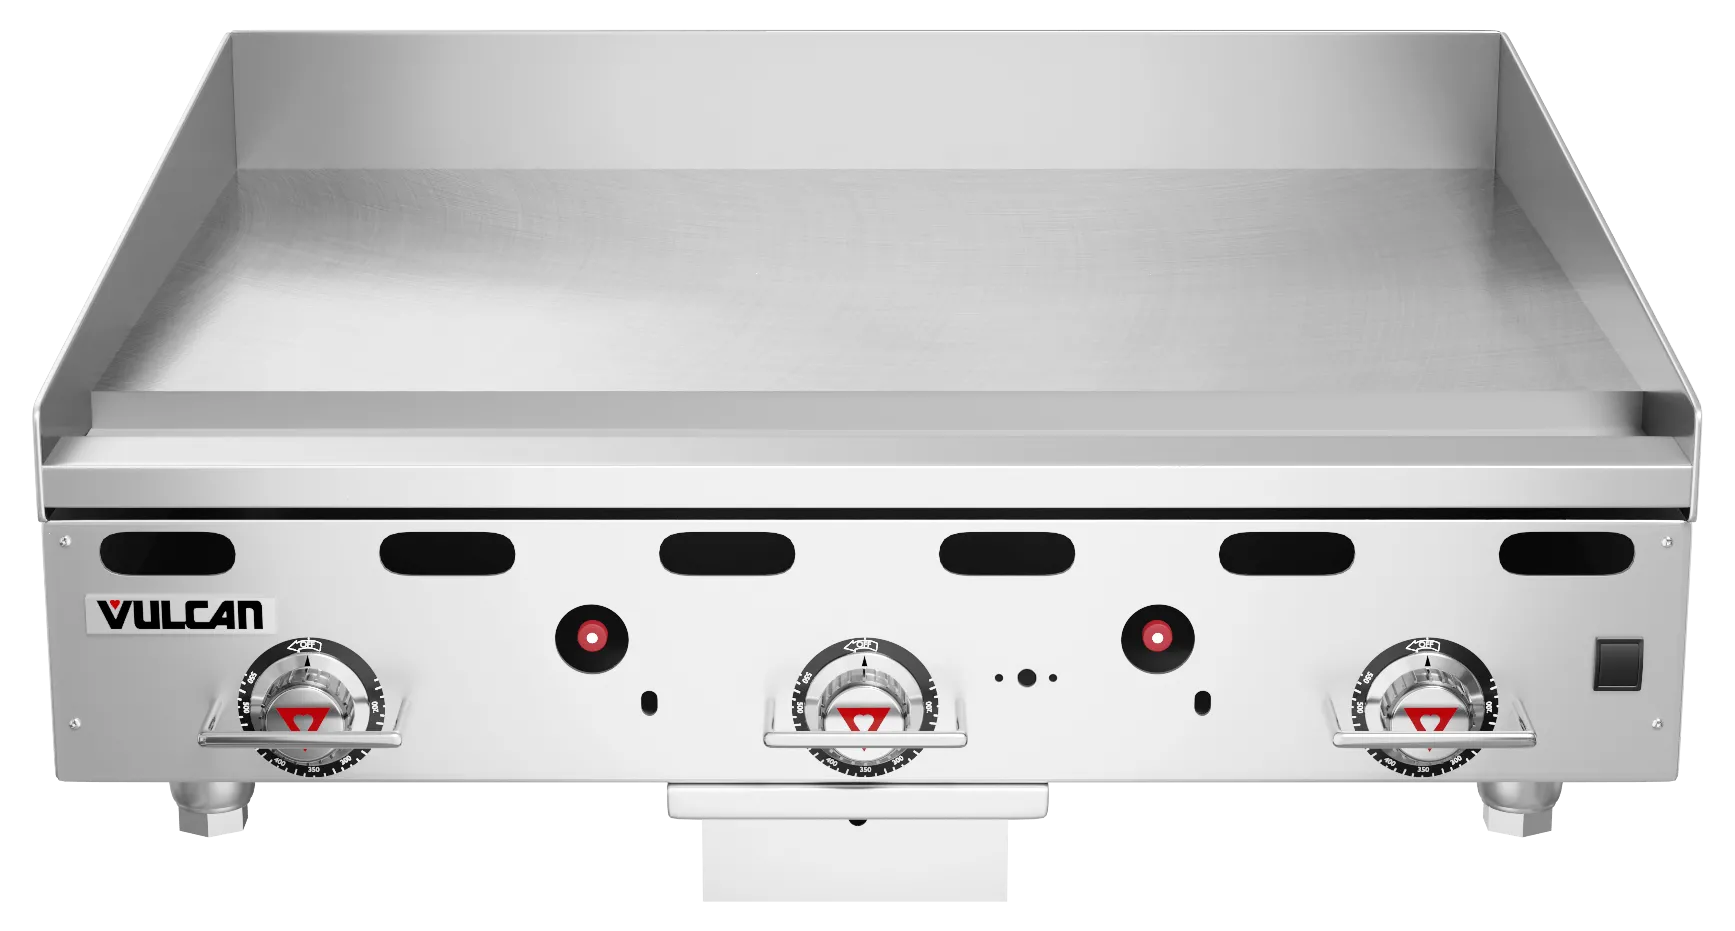 How to Light the Pilot on Flat Top Grill: A Guide from Your Grill Master - 118215707.png - Eleven36 Blog